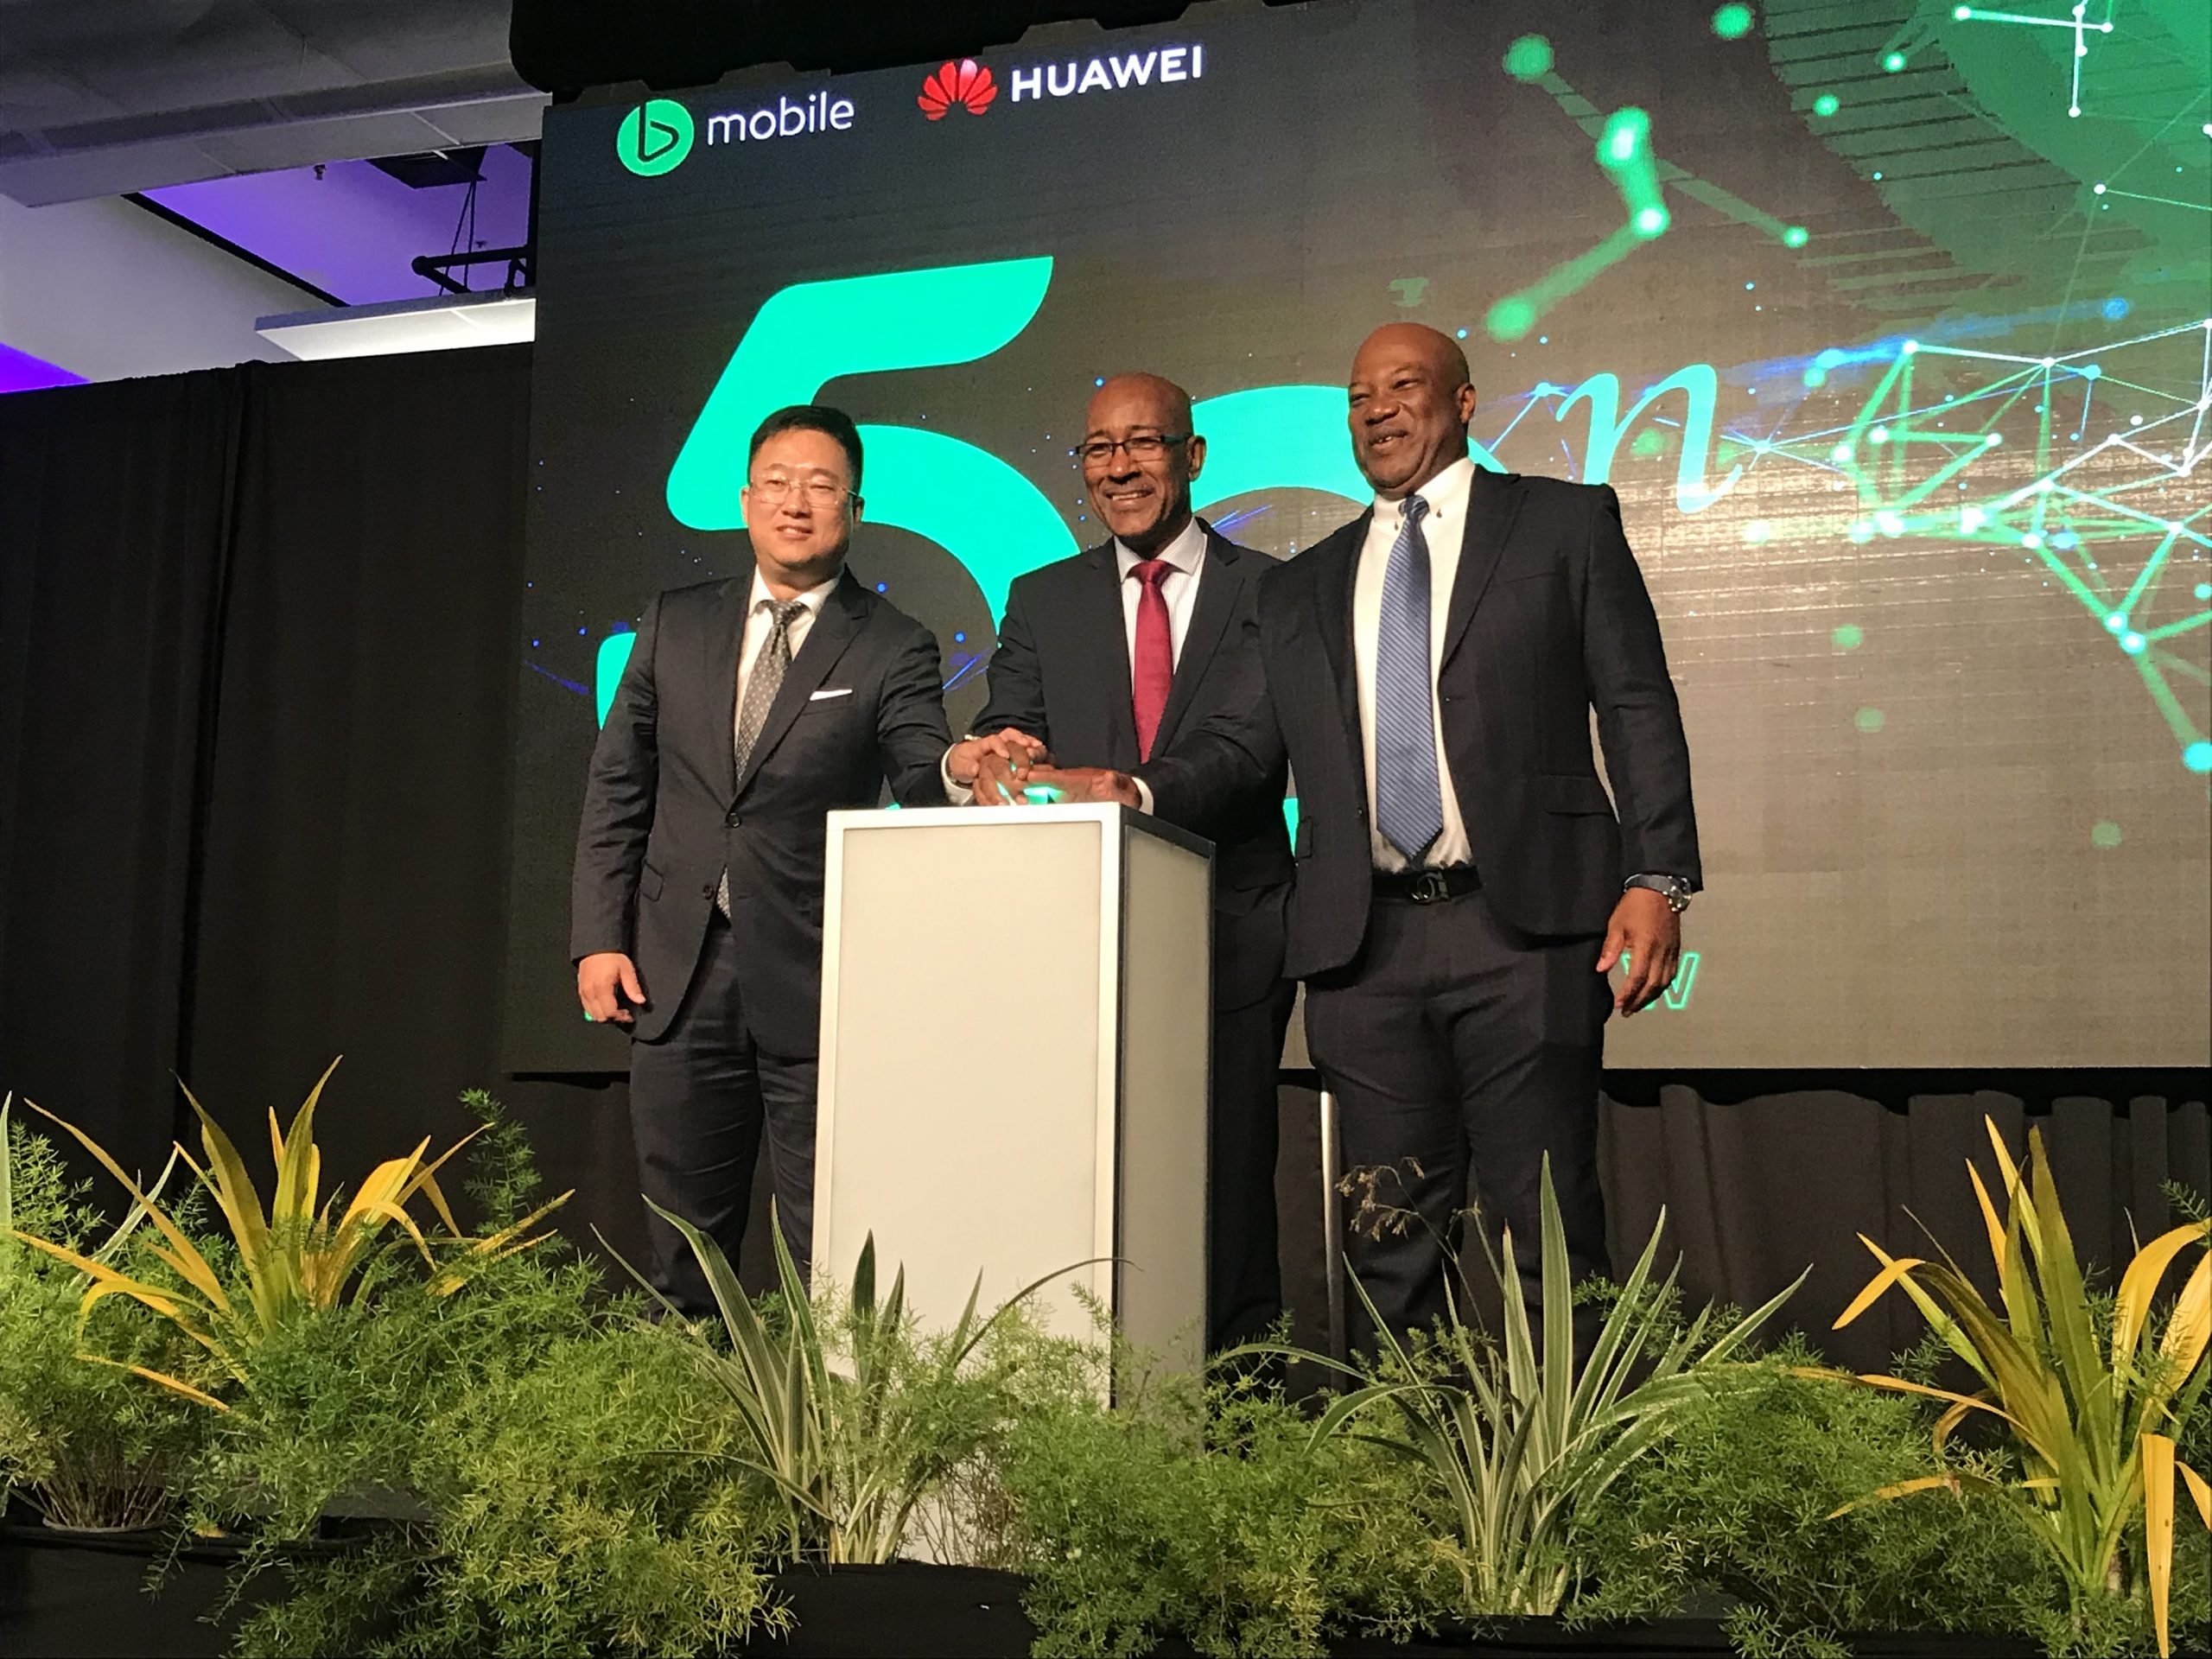 “Broadband should be a right, not an option”- says TSTT at 5G launch